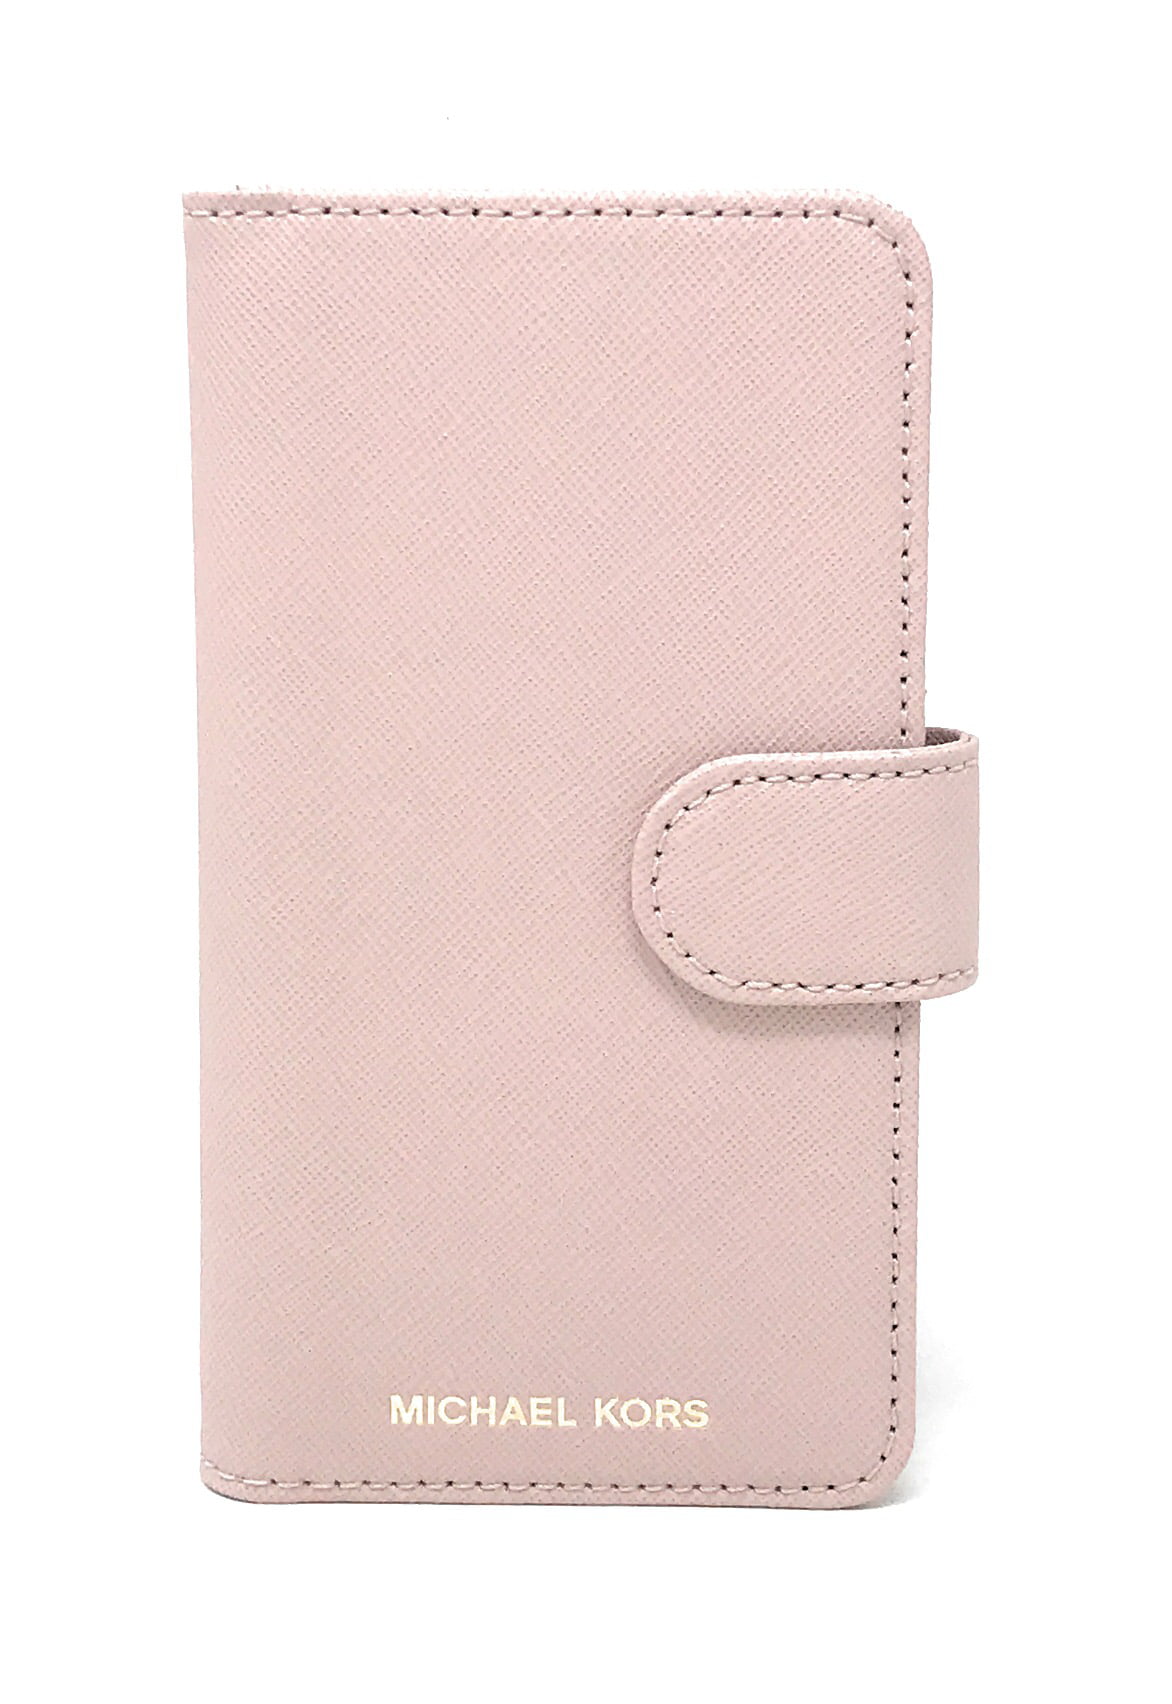 Michael Kors Electronic Leather Folio Phone Case for iPhone 8 / iPhone ...